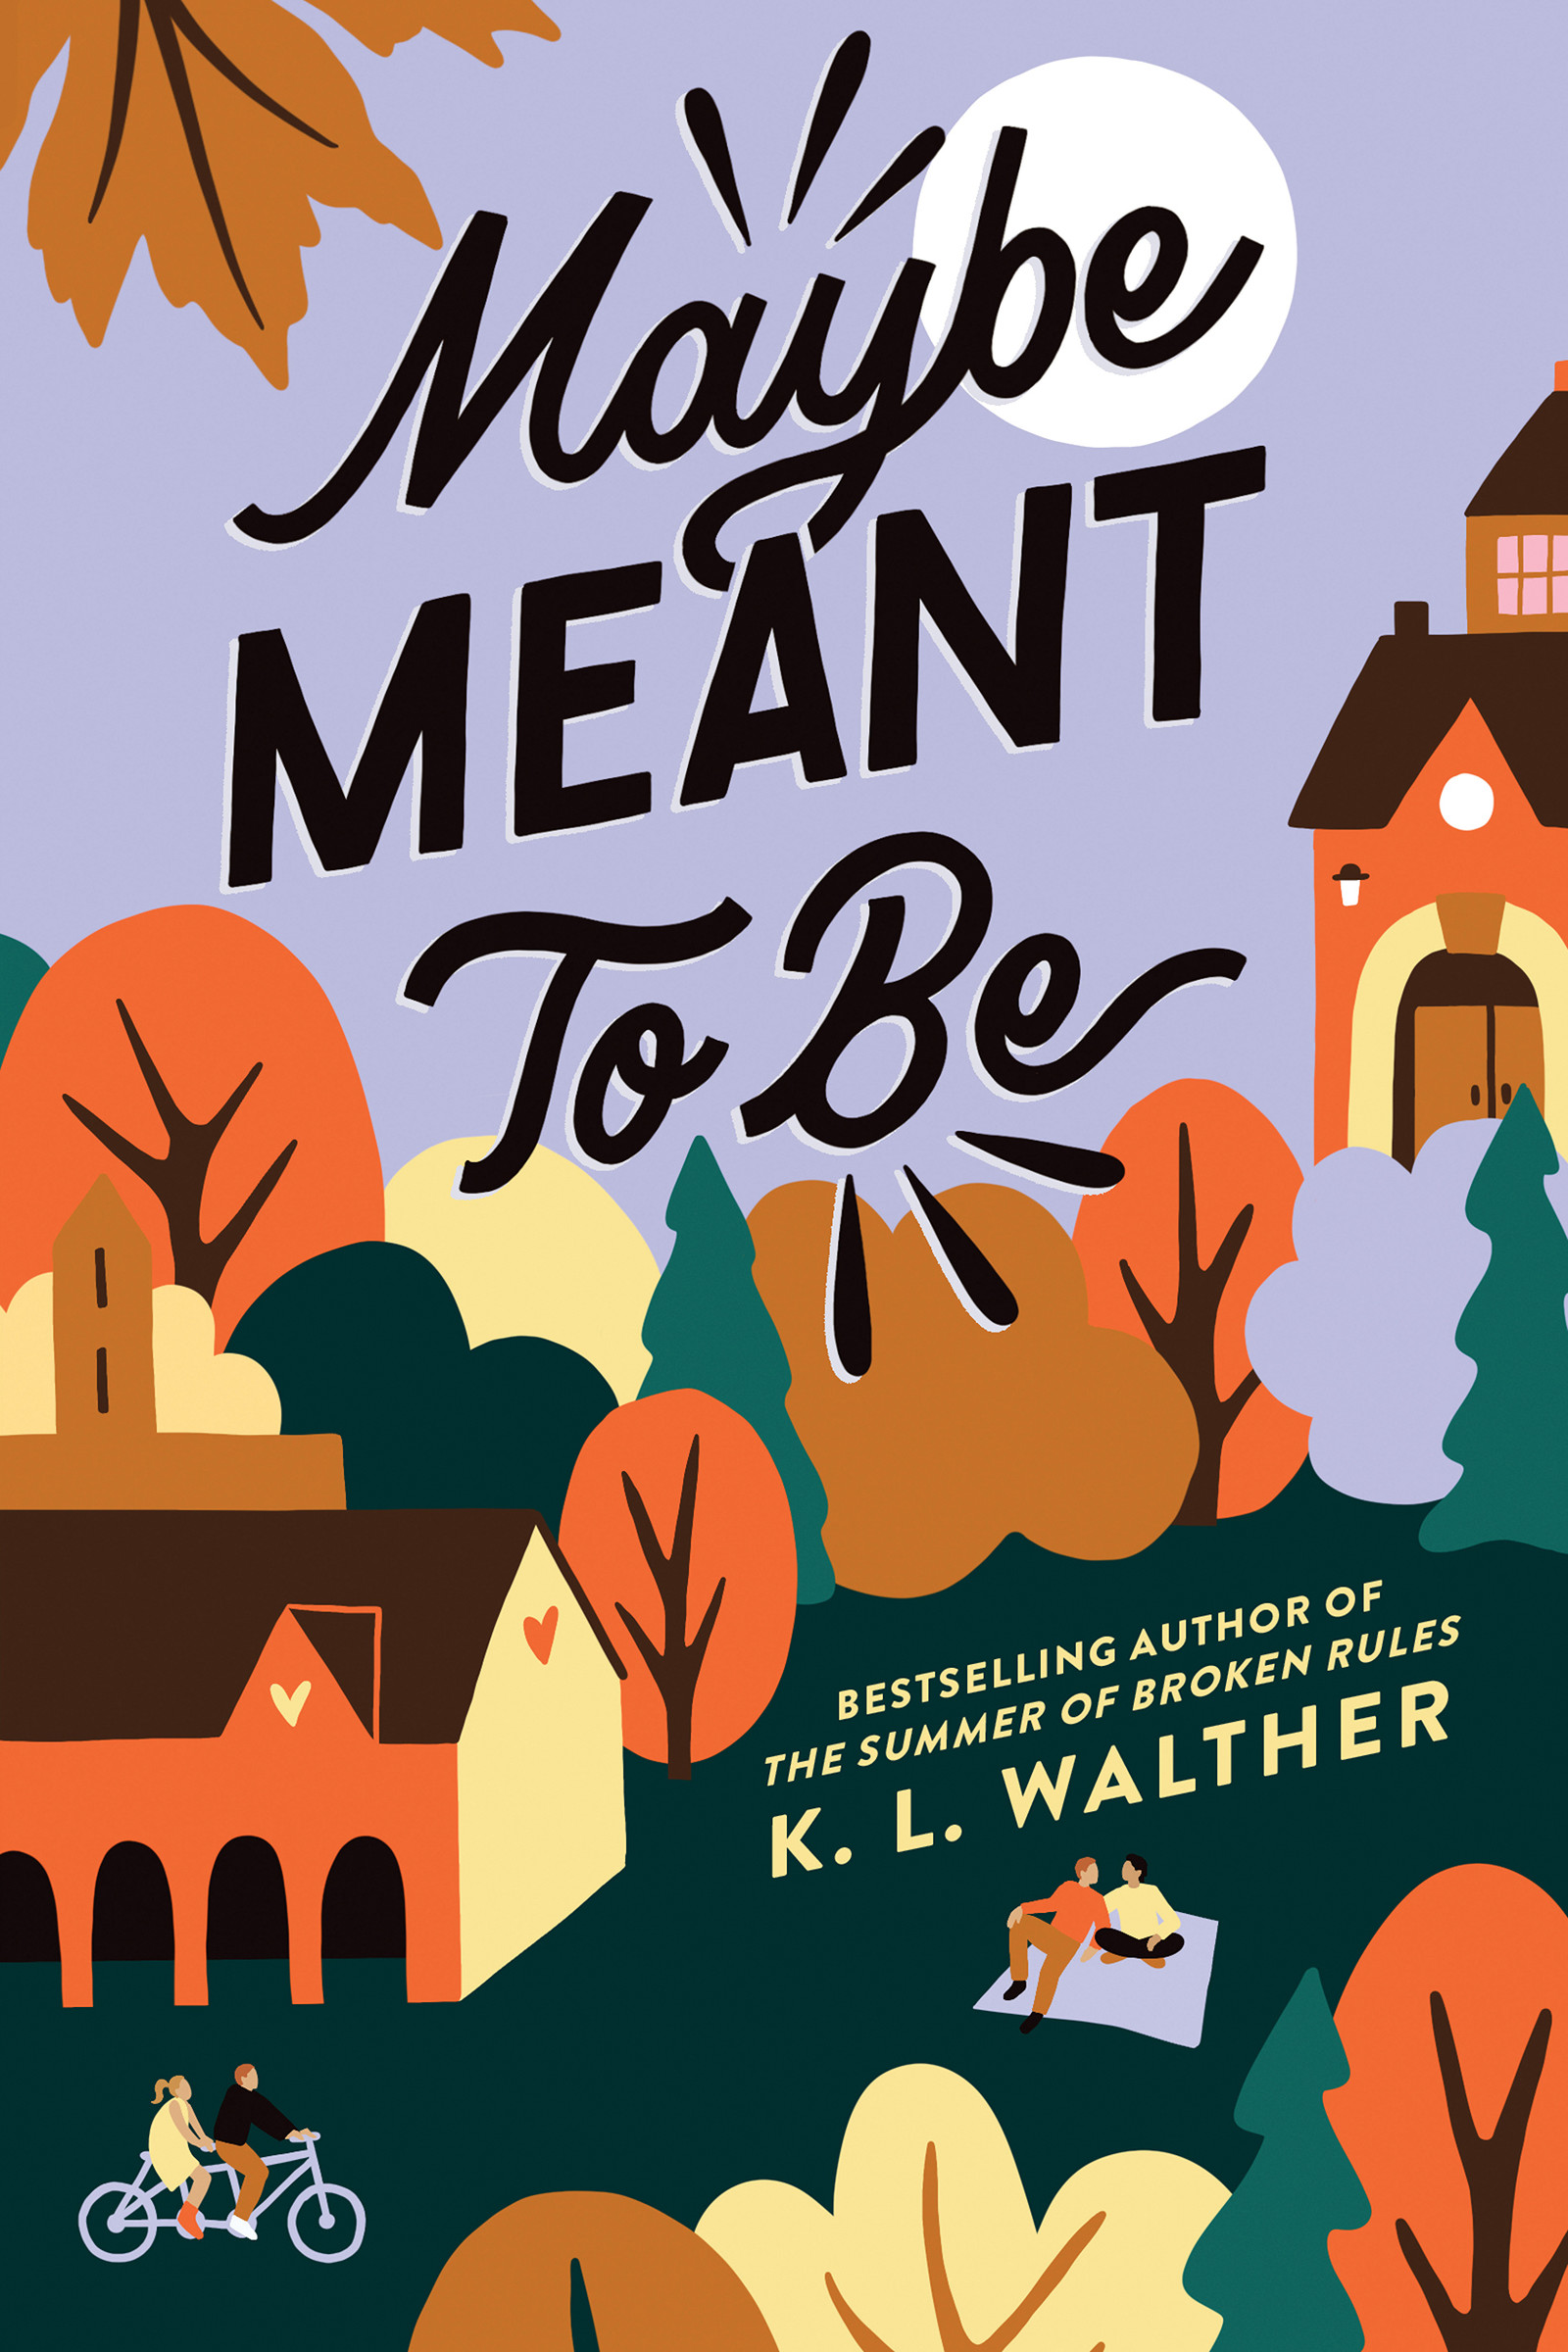 Maybe Meant to Be | Walther, K. L. (Auteur)